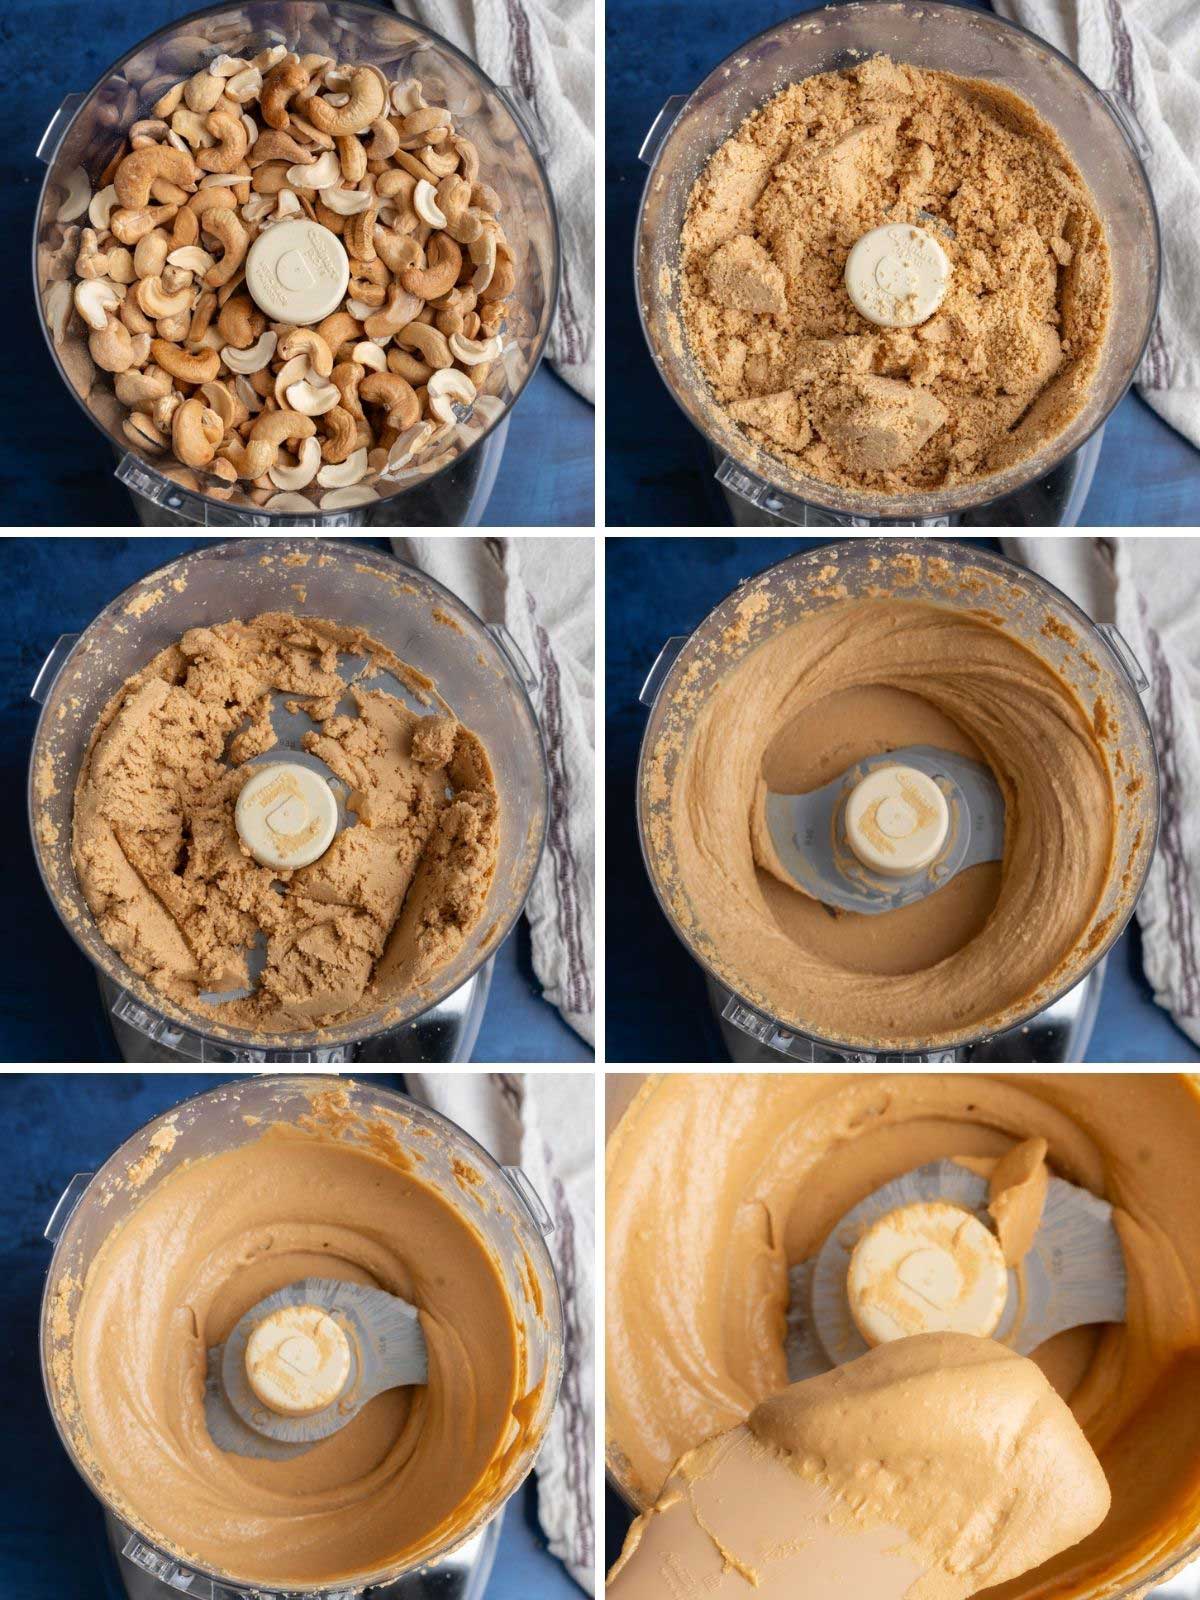 The cashews in a food processor turning to nut butter over time.